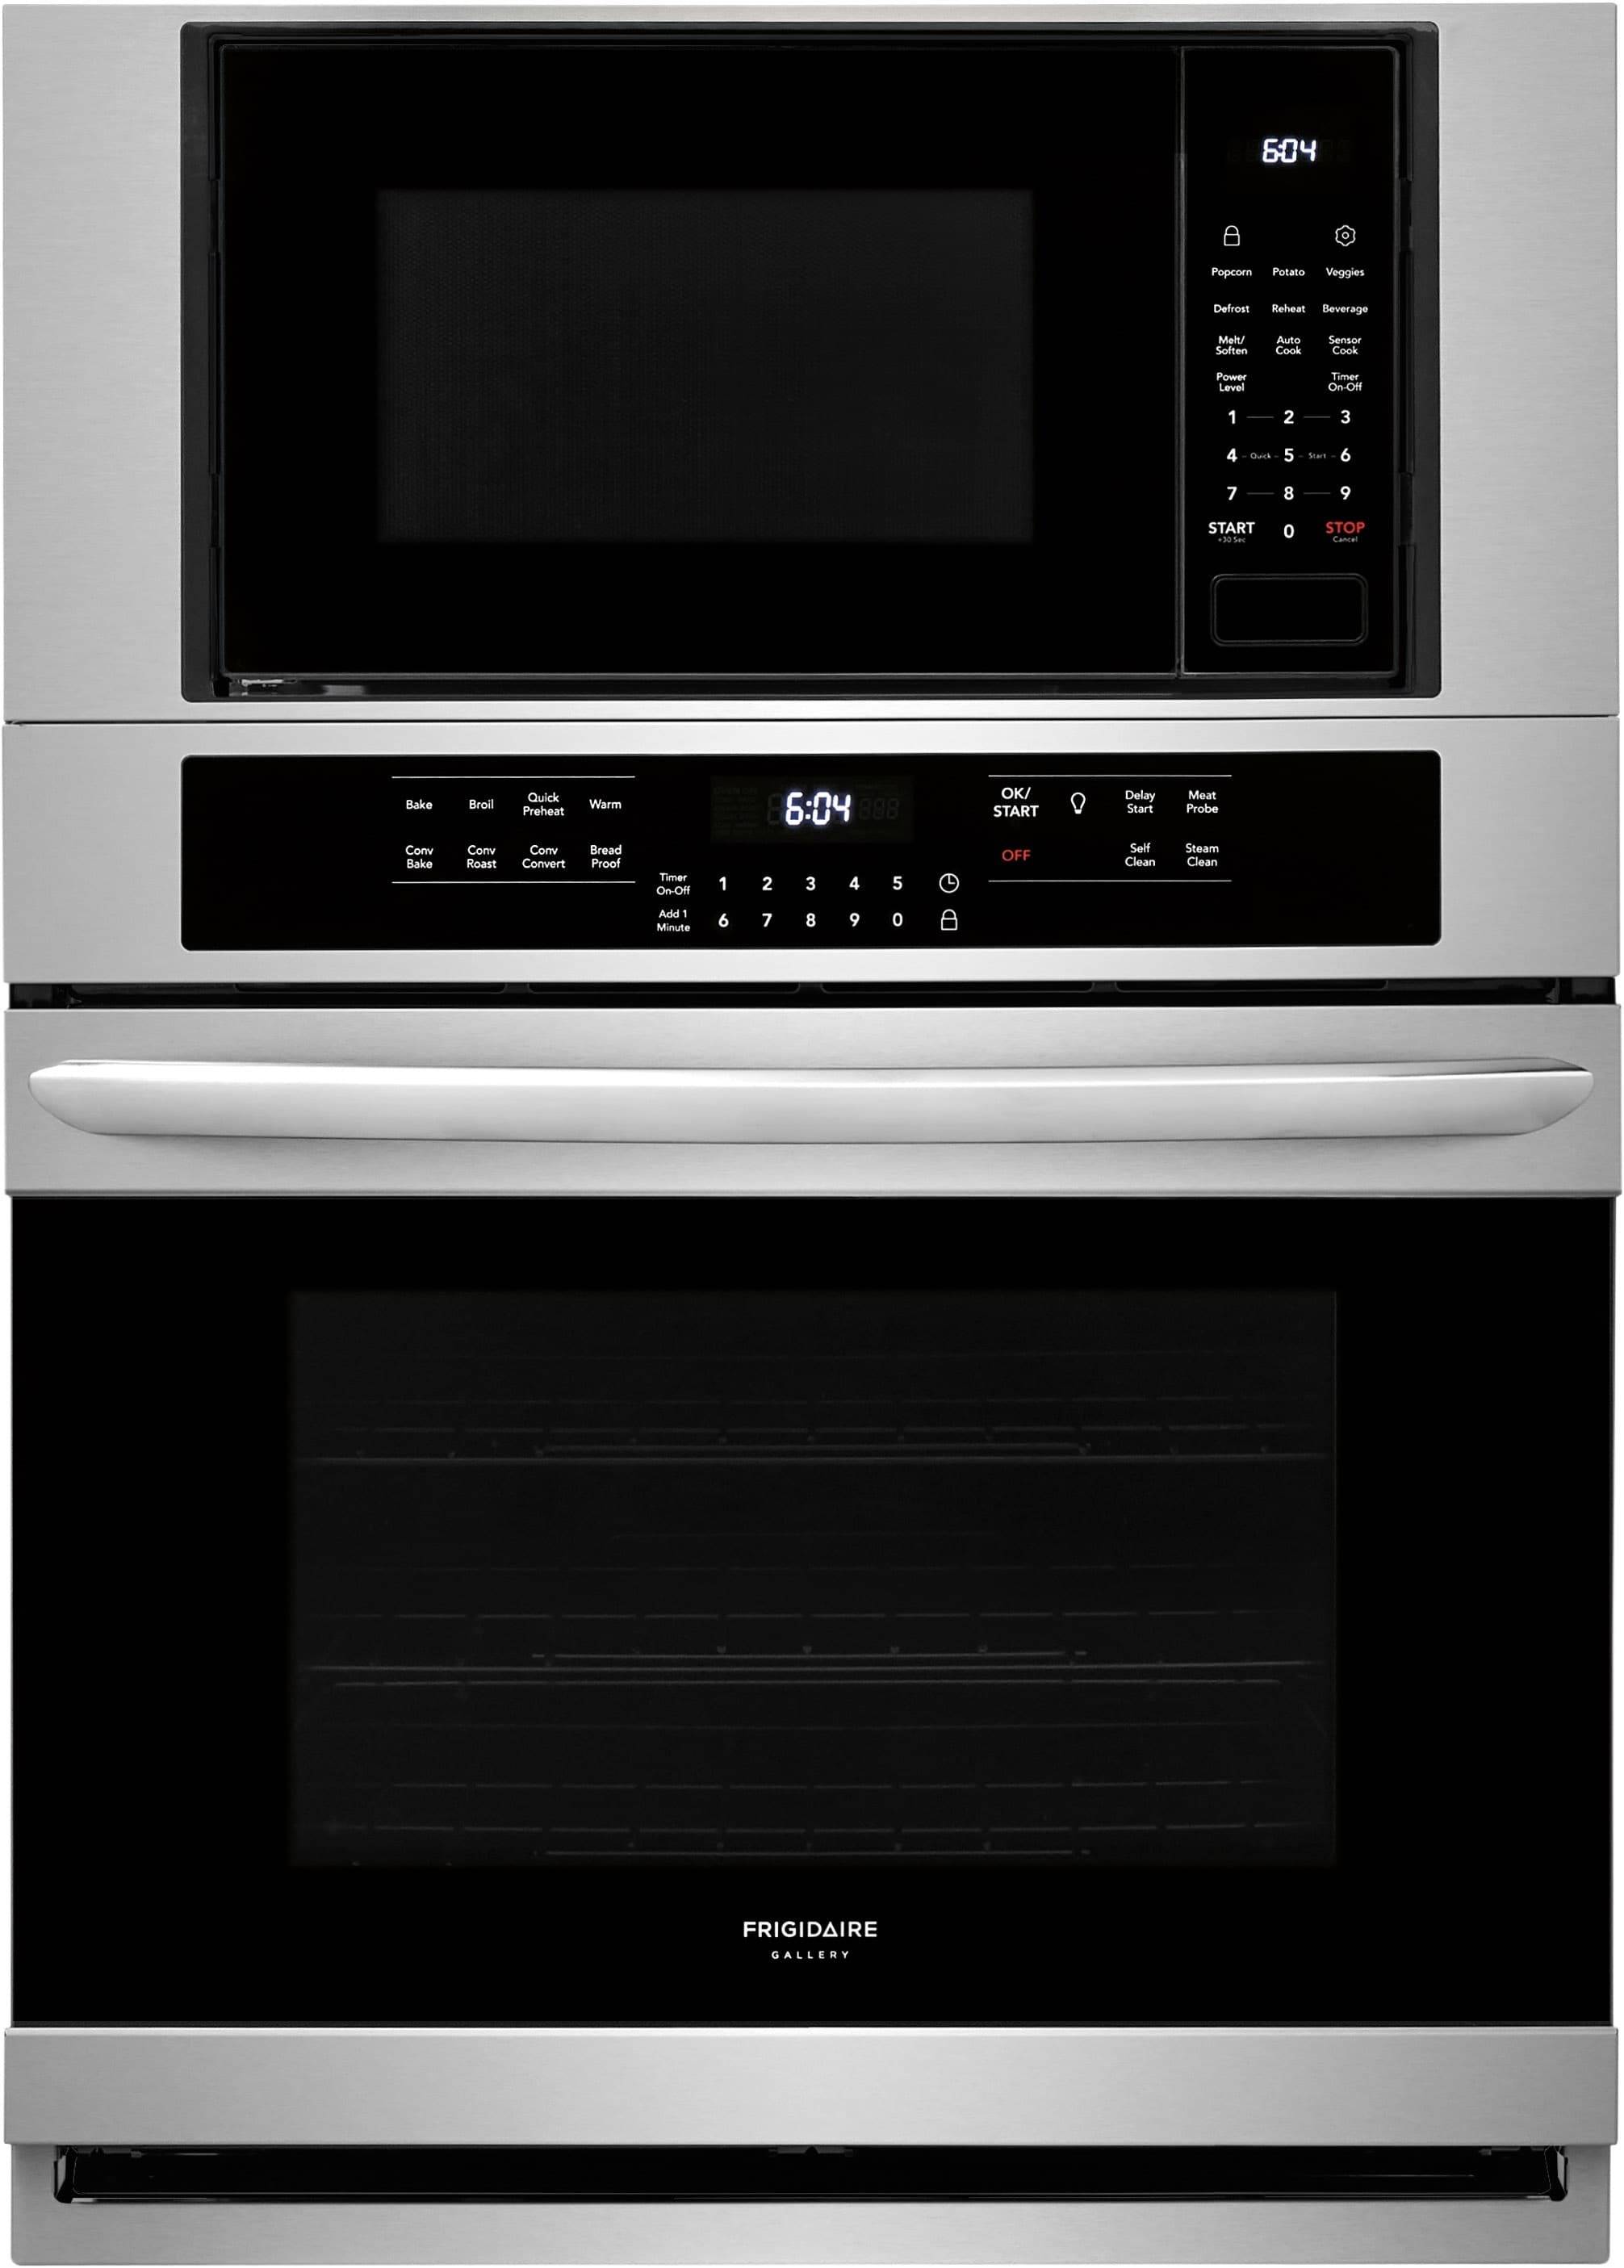 Frigidaire 30" Electric Wall Oven/Microwave Combination (Stainless Steel)